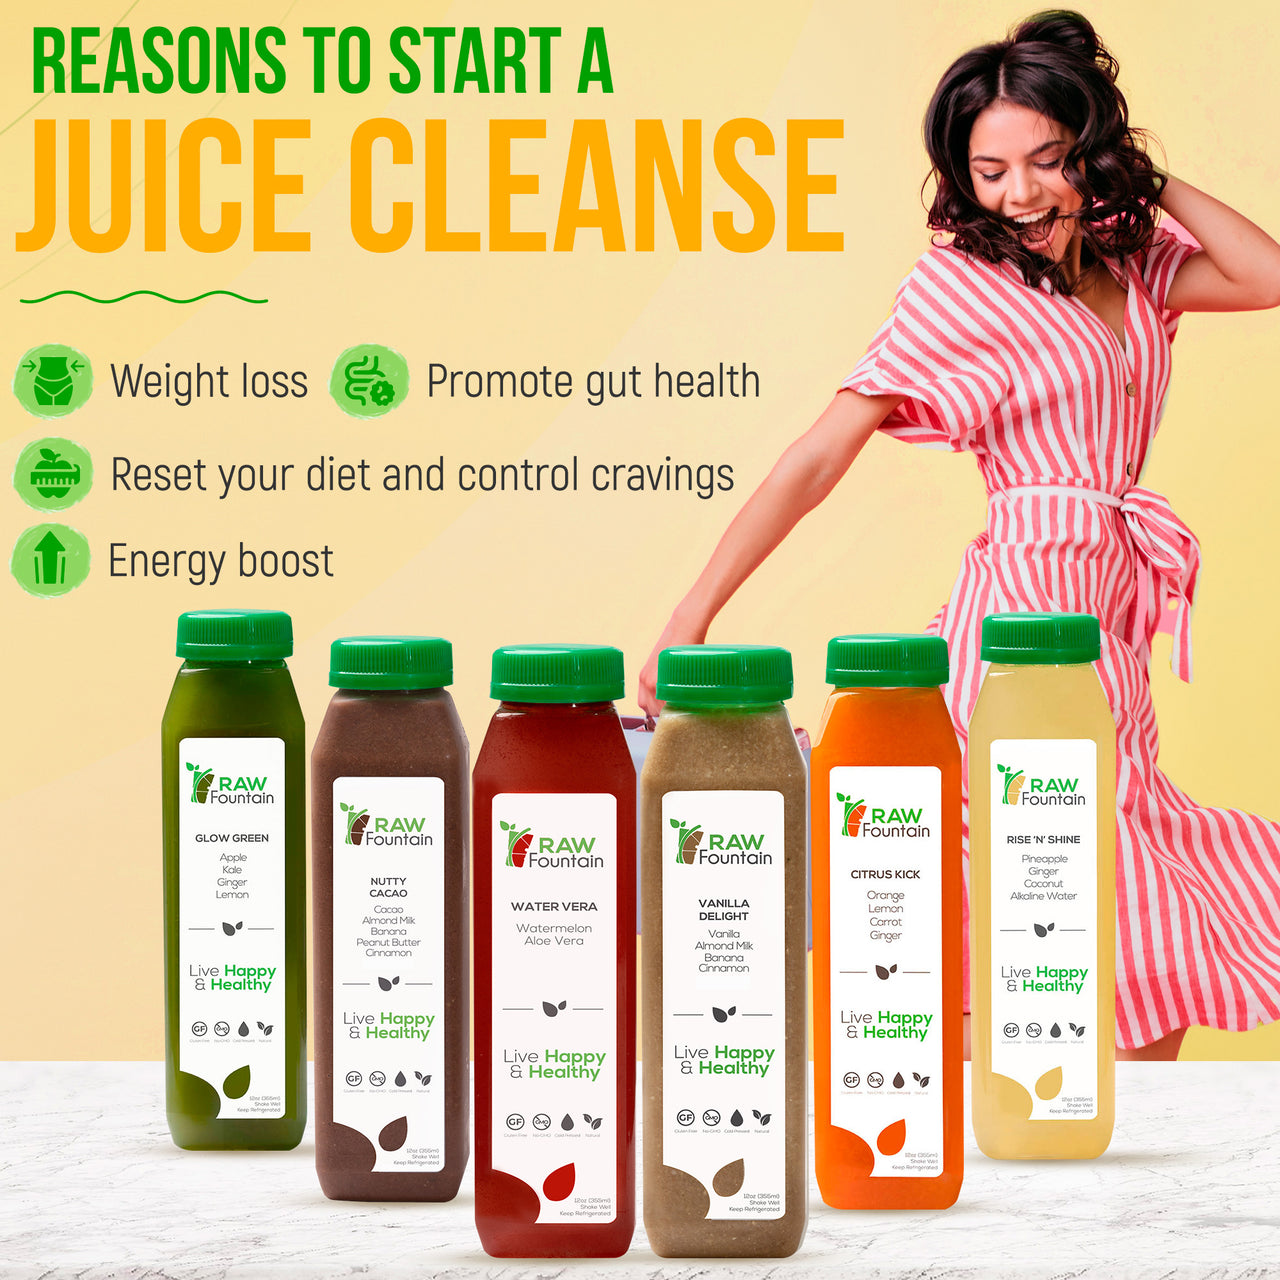 7 Day Protein Juice Cleanse | All Natural Raw and Cold Pressed | 42 Bottles